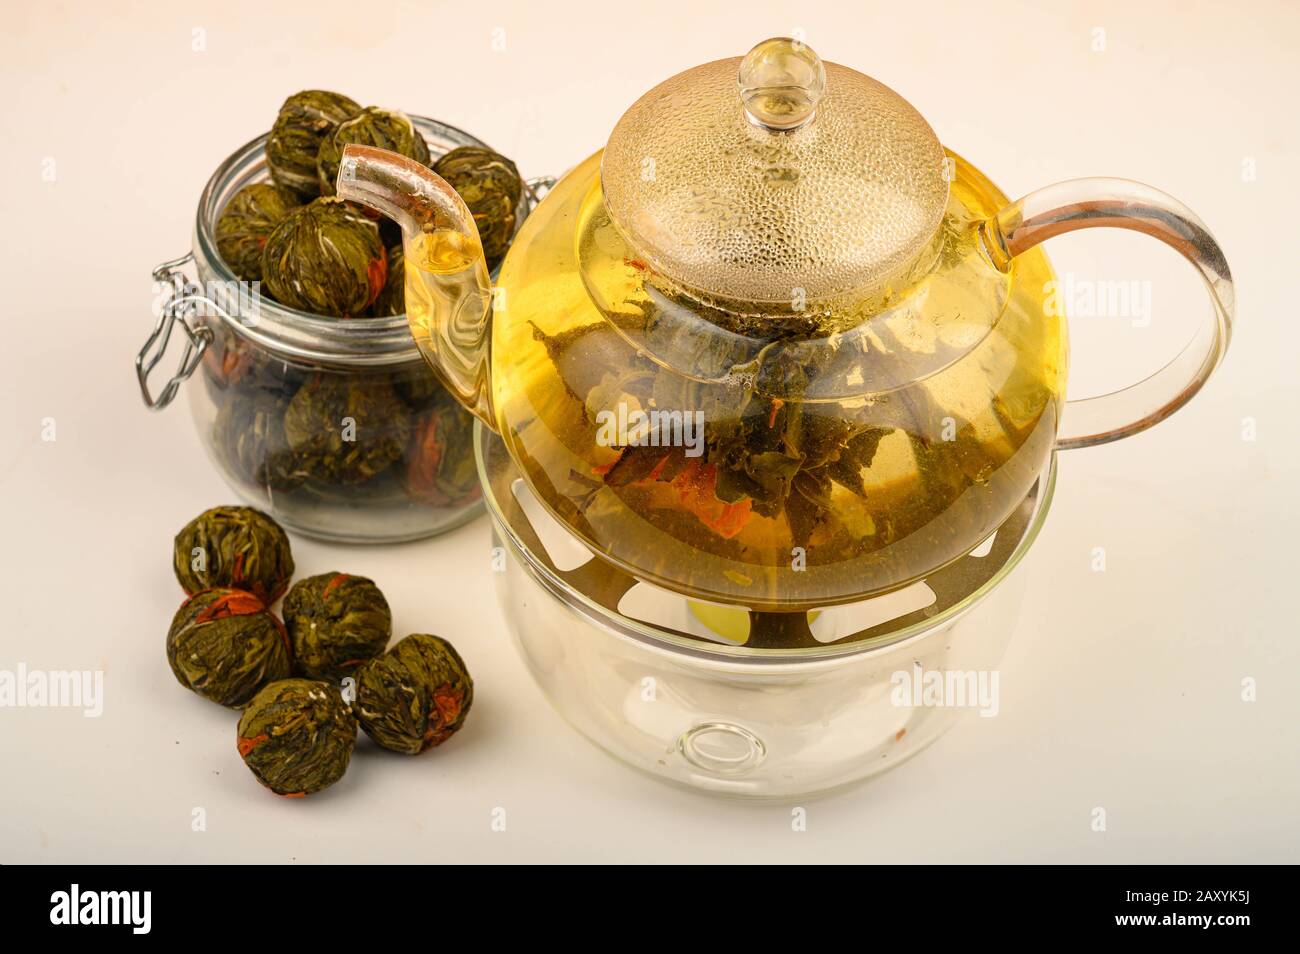 Flower tea brewed in a glass teapot, flower tea balls and a jar of tea on a white background. Close up Stock Photo